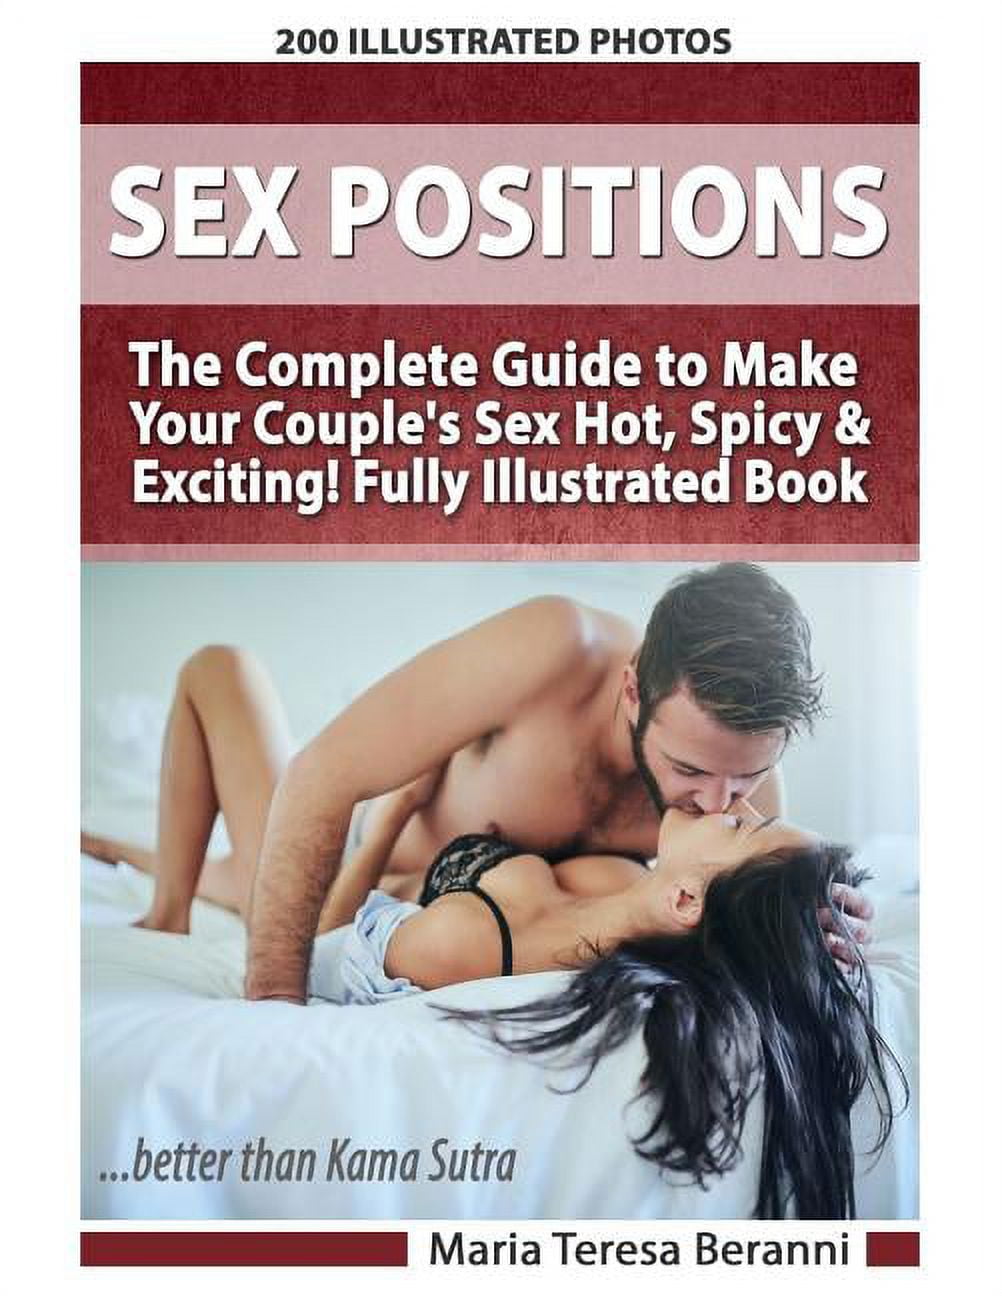 Sex Positions Includes 200 Illustrated Photos The Complete Guide to Make Your Couples Sex Hot, Spicy and Exciting! Fully Illustrated Book, better than kama sutra photo